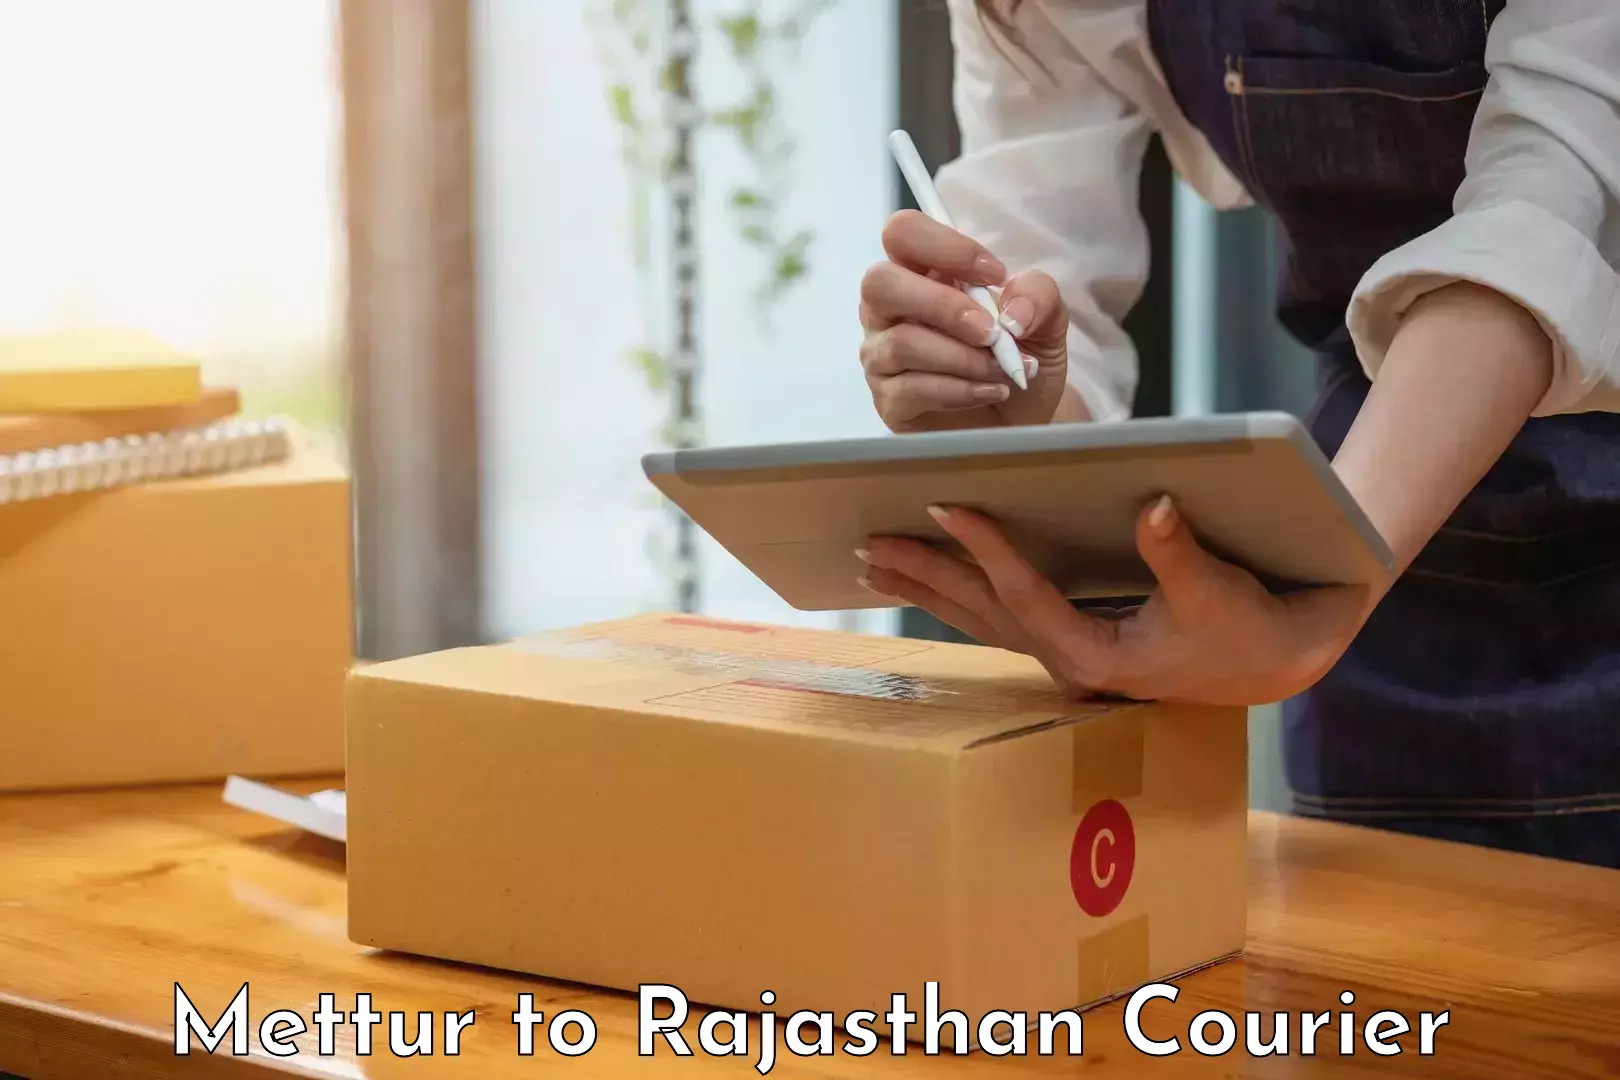 Customer-centric shipping Mettur to Rajasthan